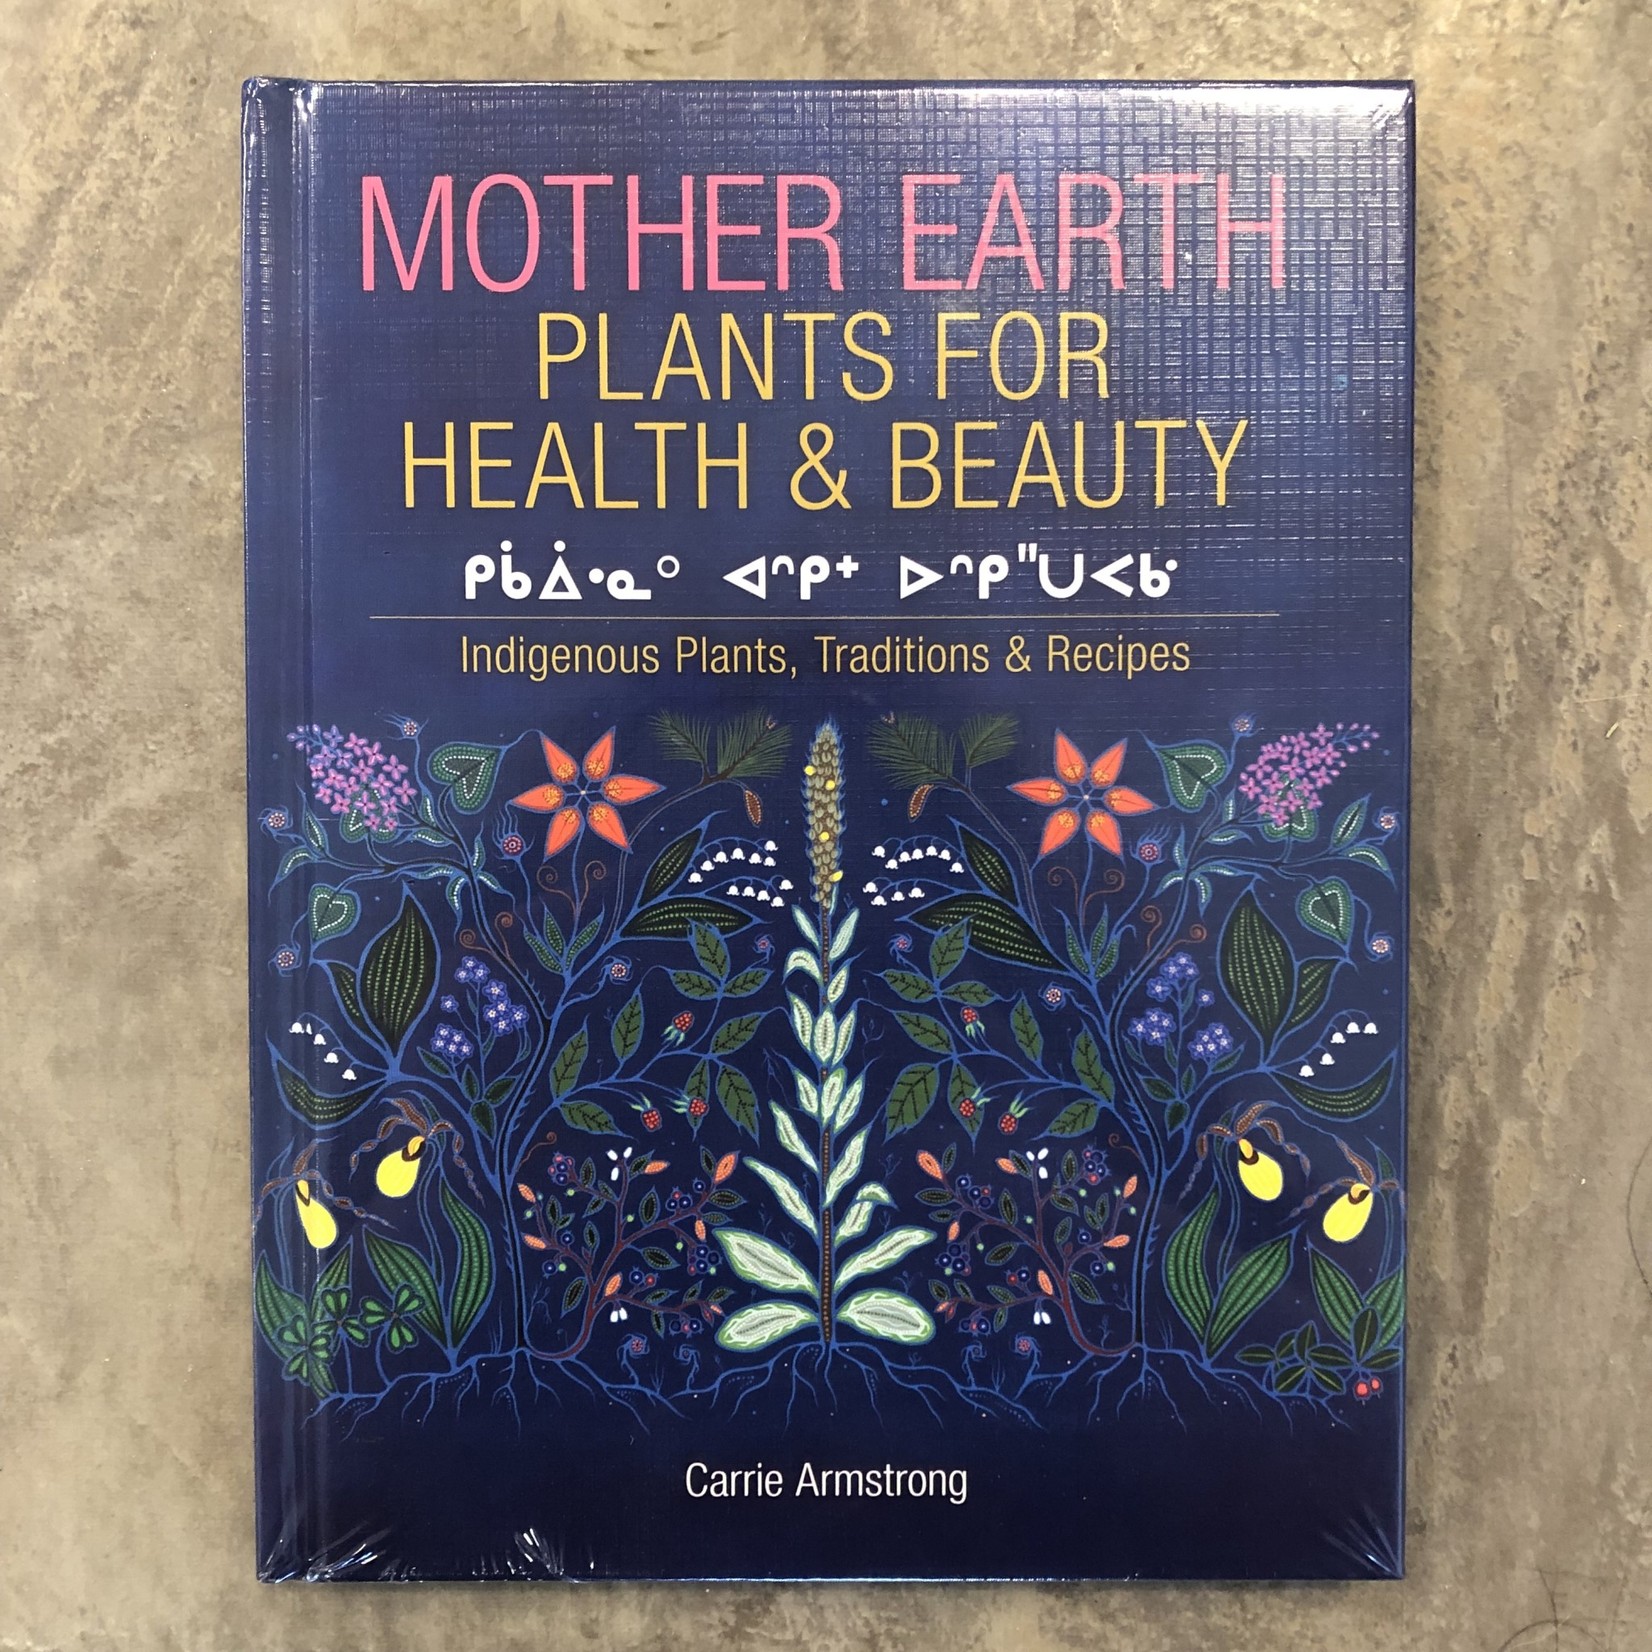 Mother Earth Plants for Health & Beauty